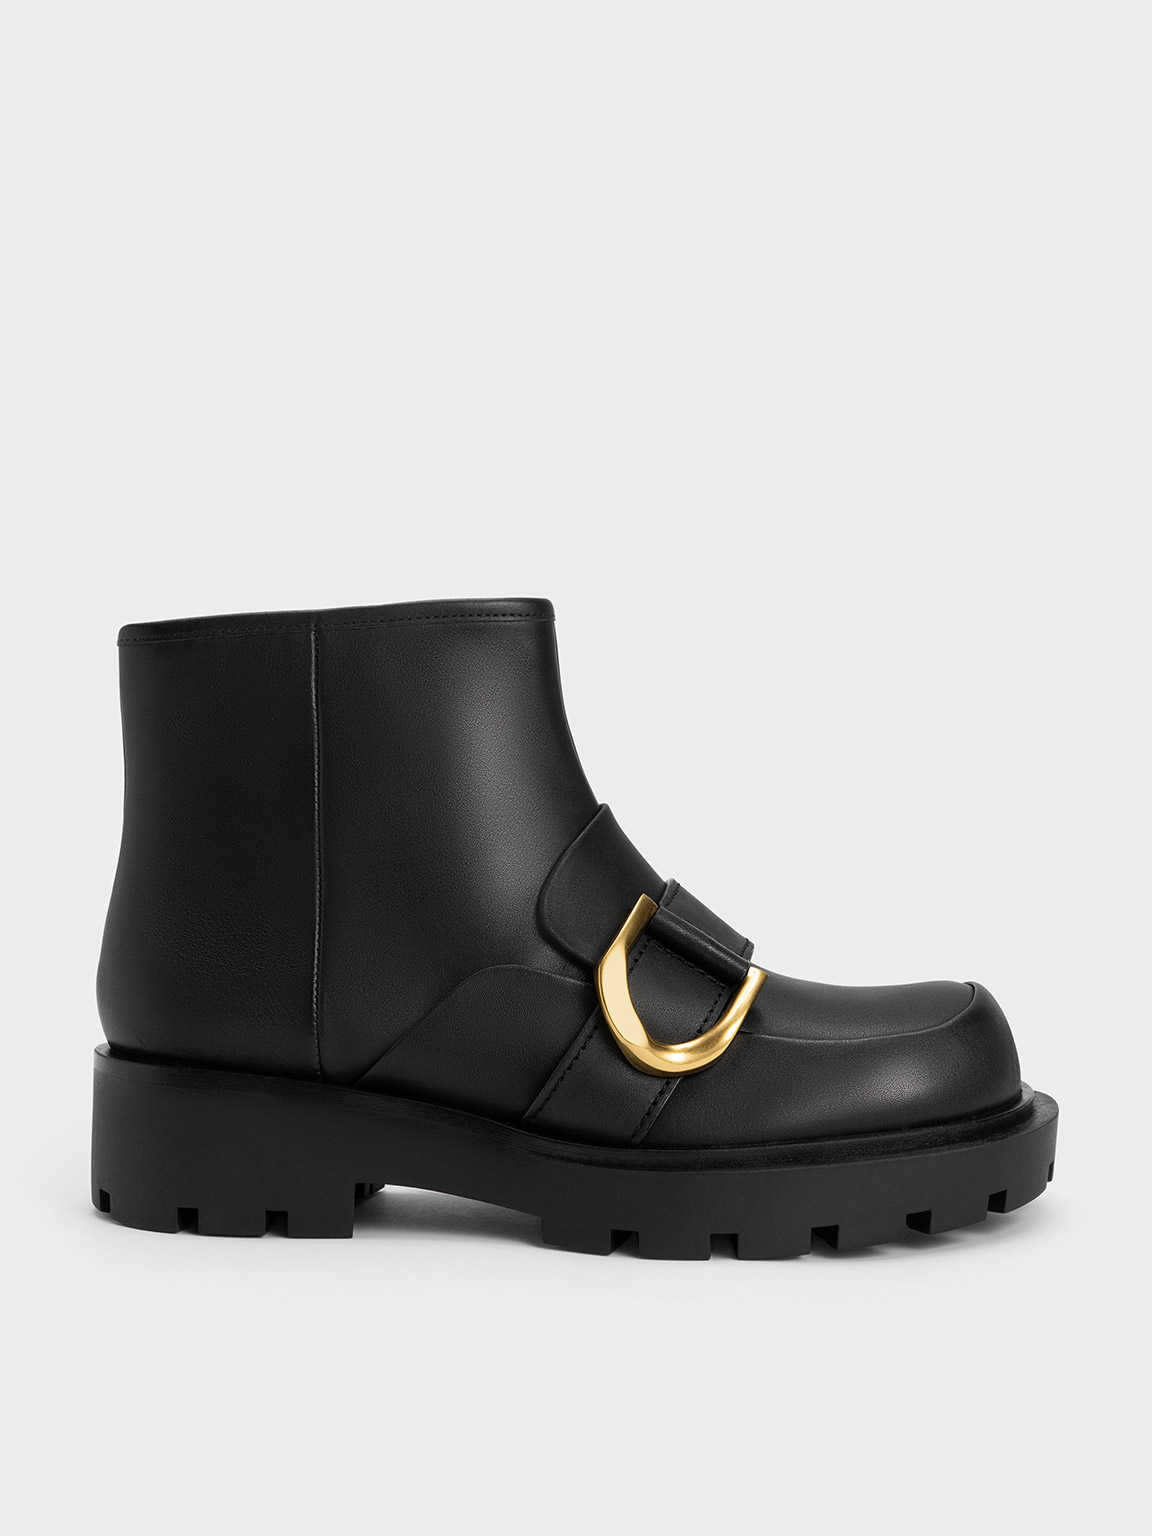 Charles & Keith Gabine Loafer Ankle Boots In Black